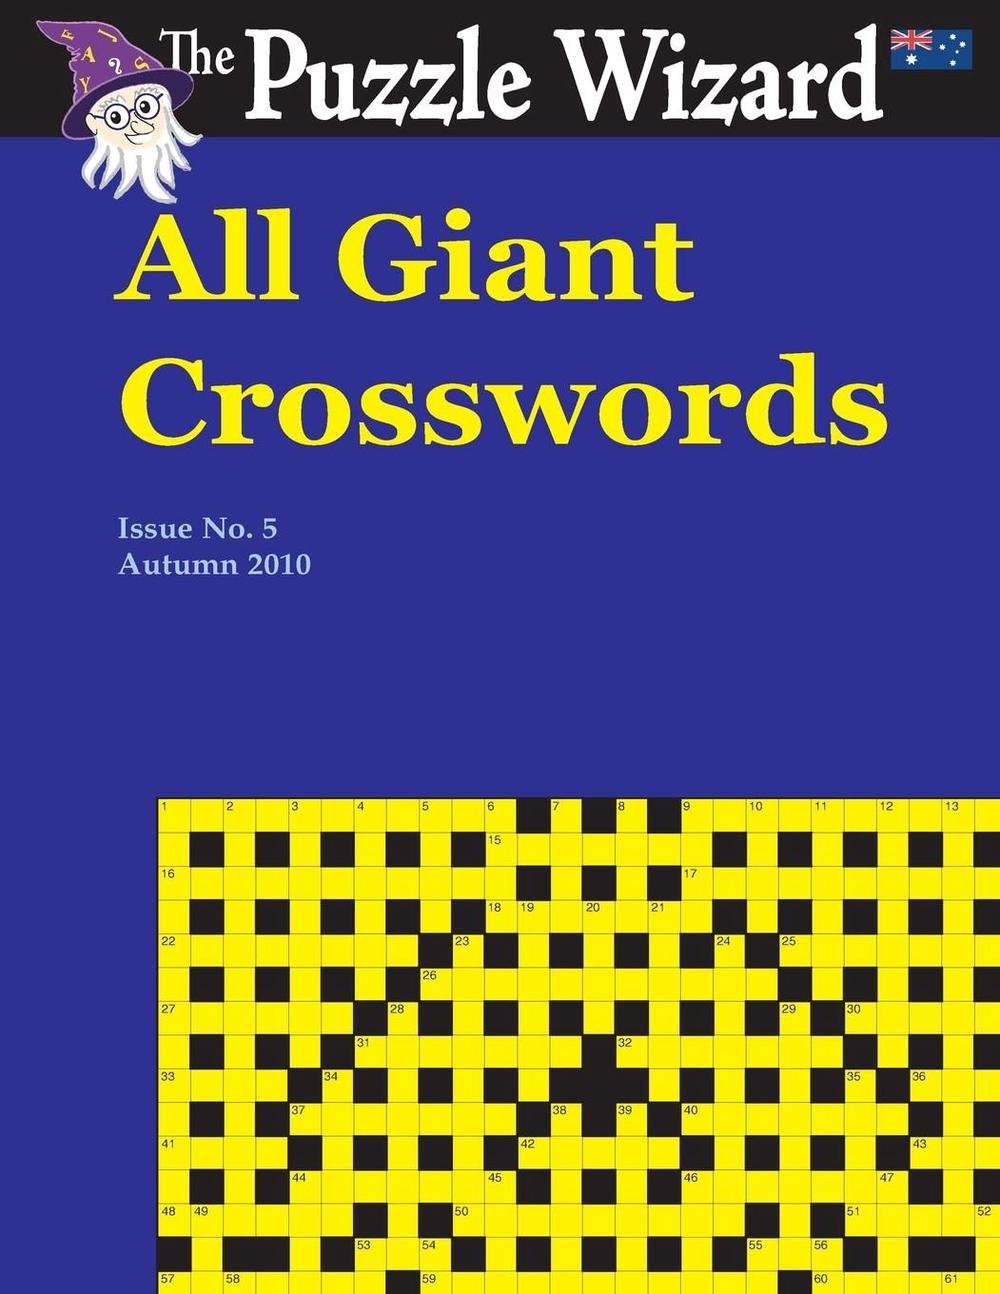 All Giant Crosswords No. 5 by The Puzzle Wizard (English) Paperback